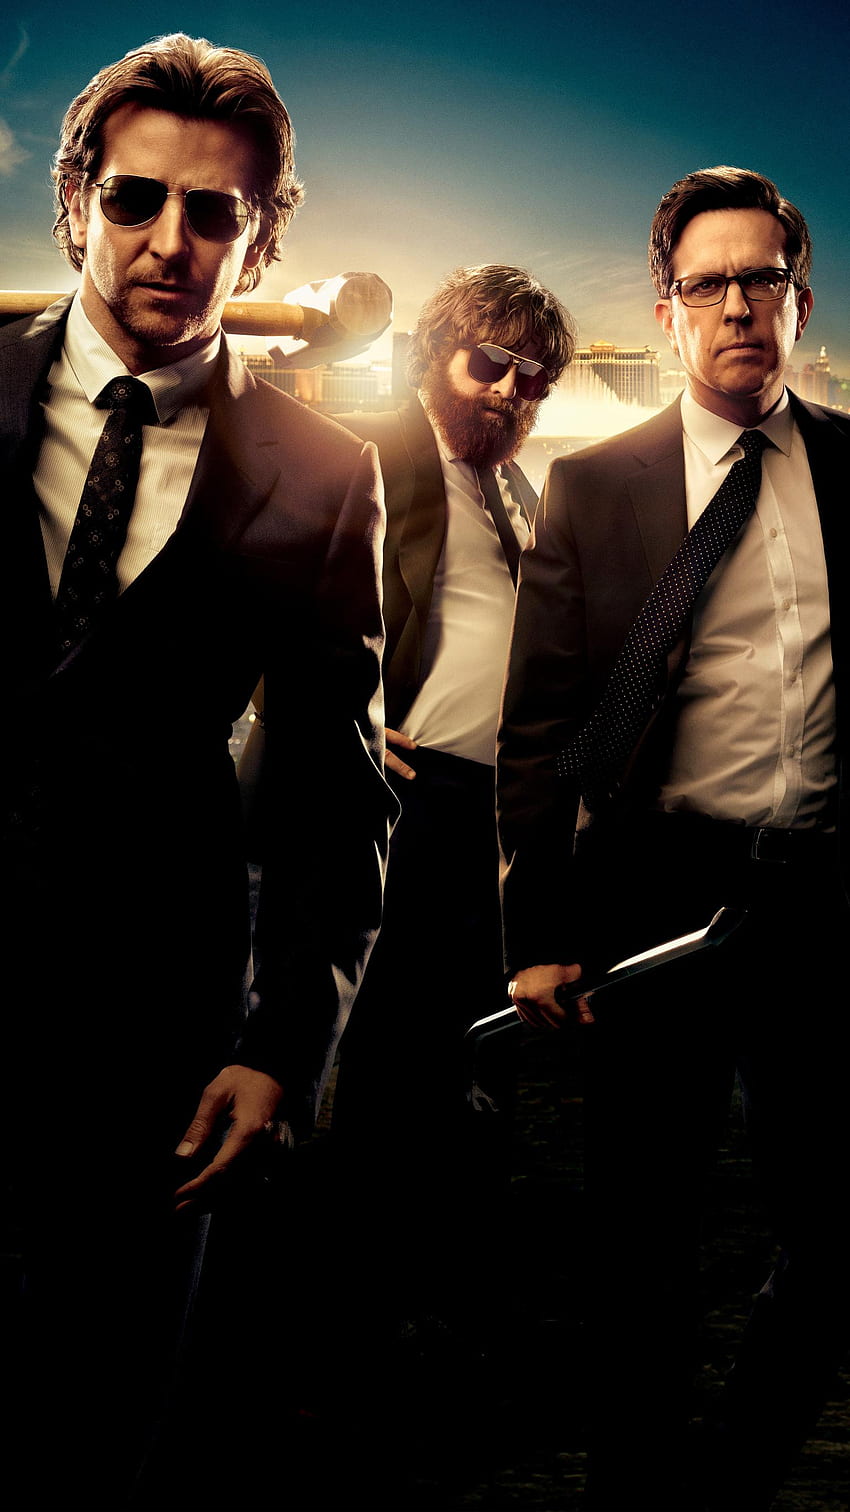 The hangover 1080P 2K 4K 5K HD wallpapers free download  Wallpaper Flare